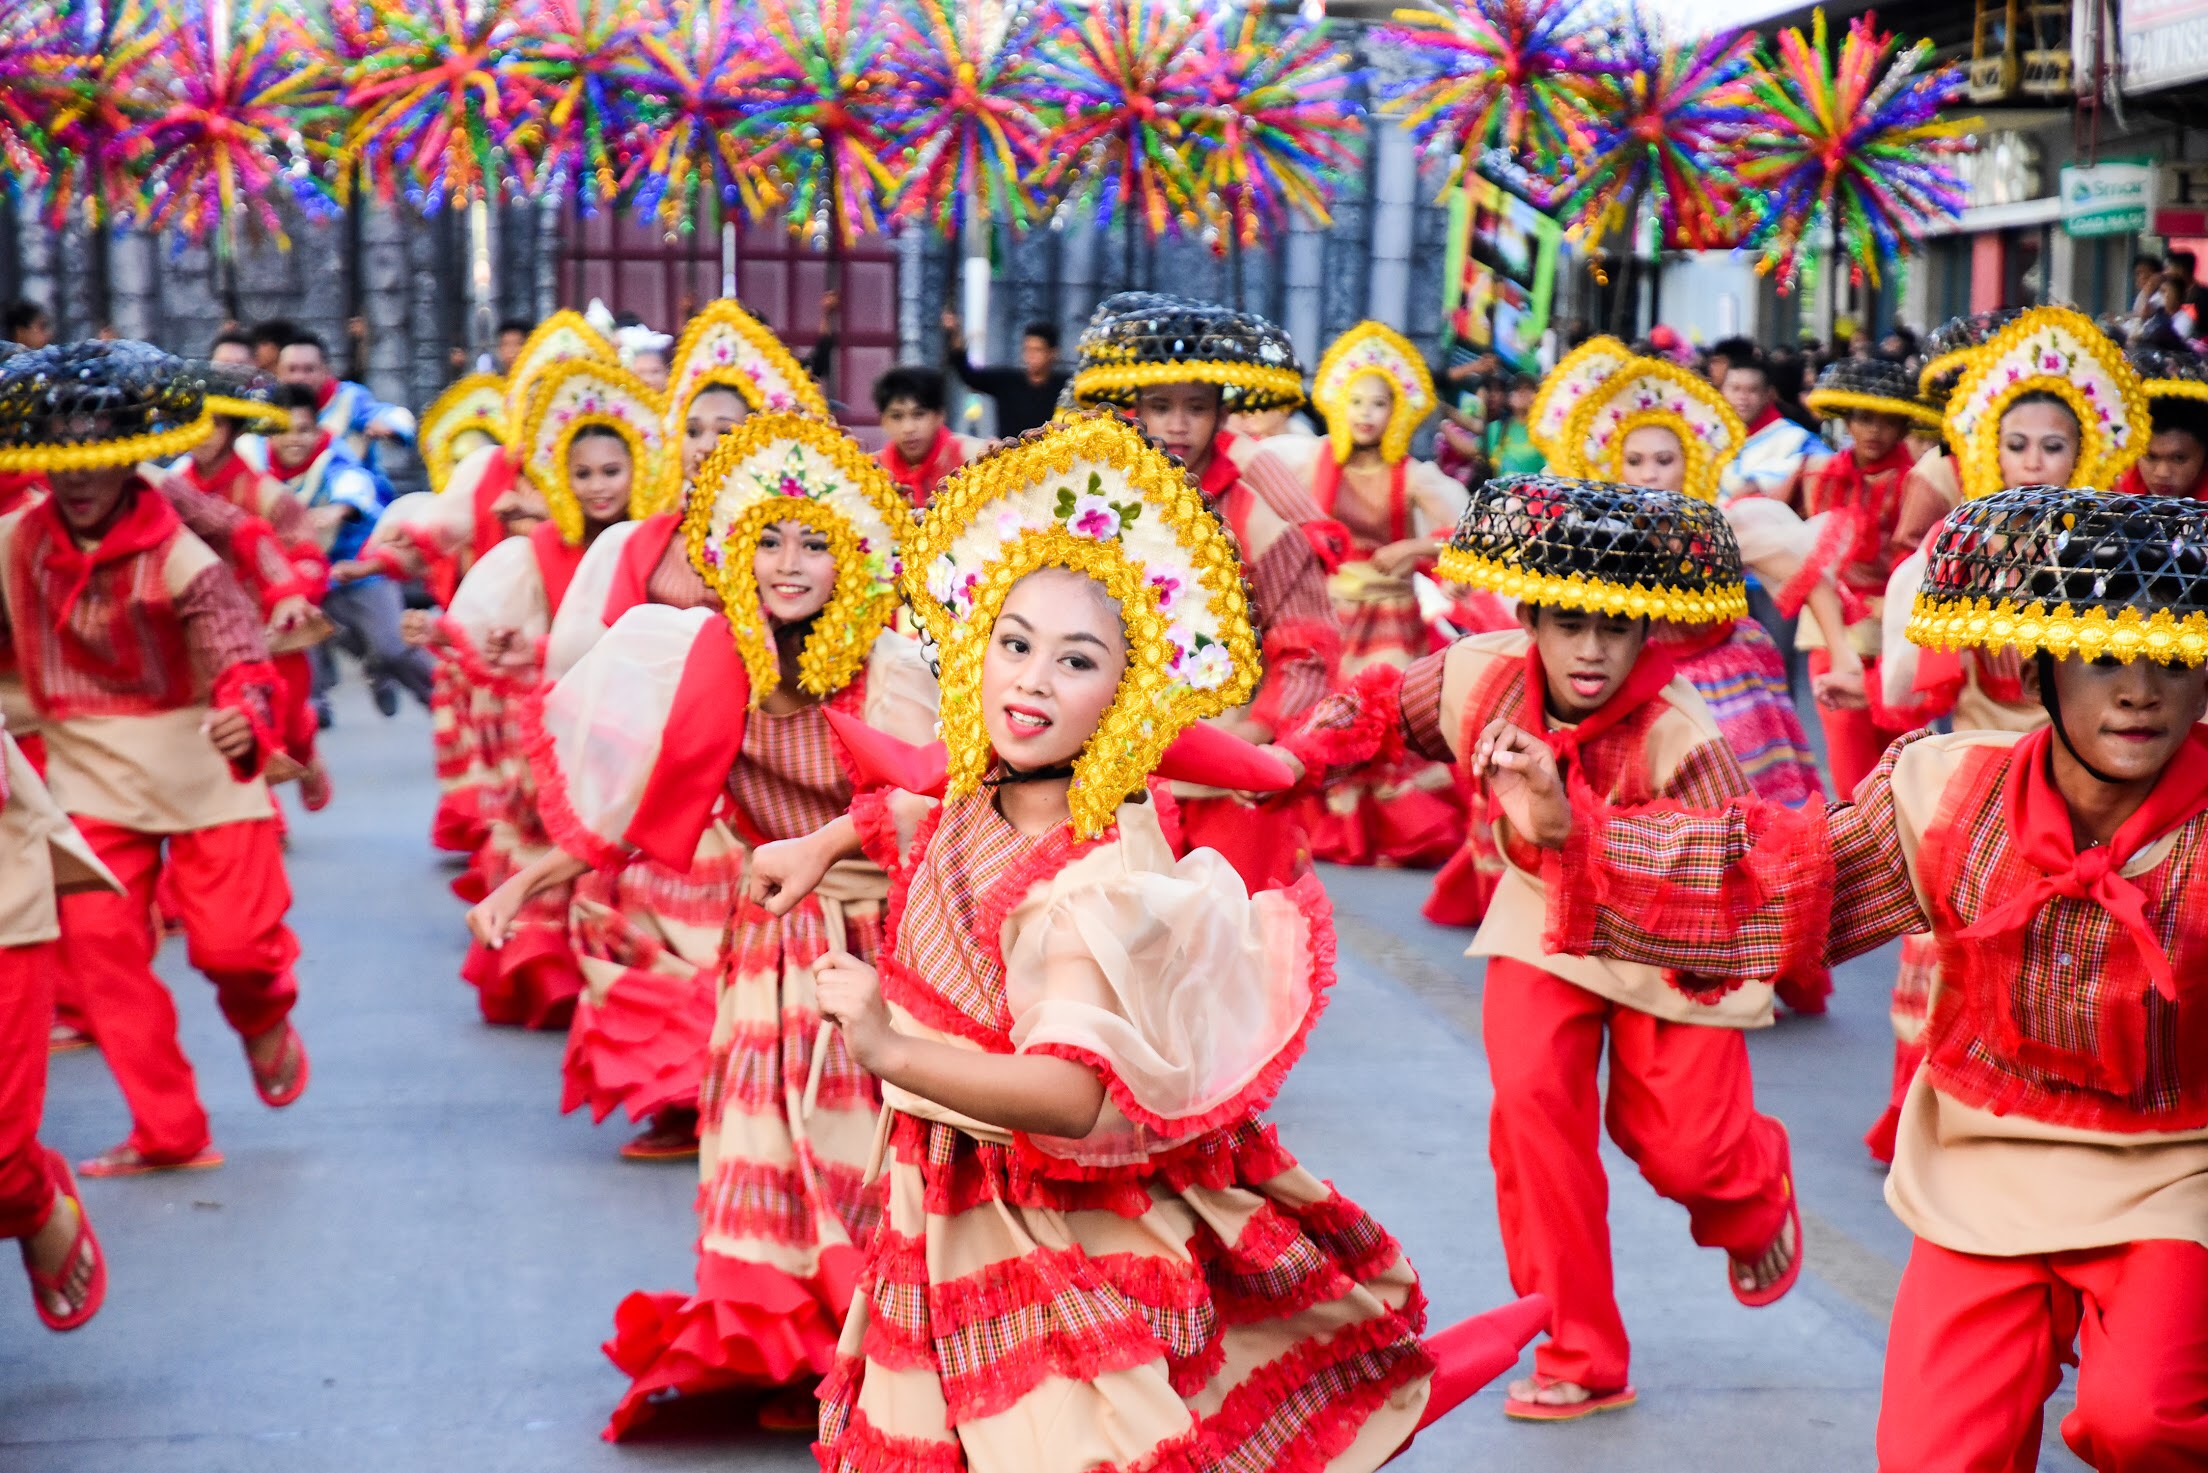 Bohol's Annual Sandugo Festival. Photo provided by the Communications Team of AirAsia Philippines.